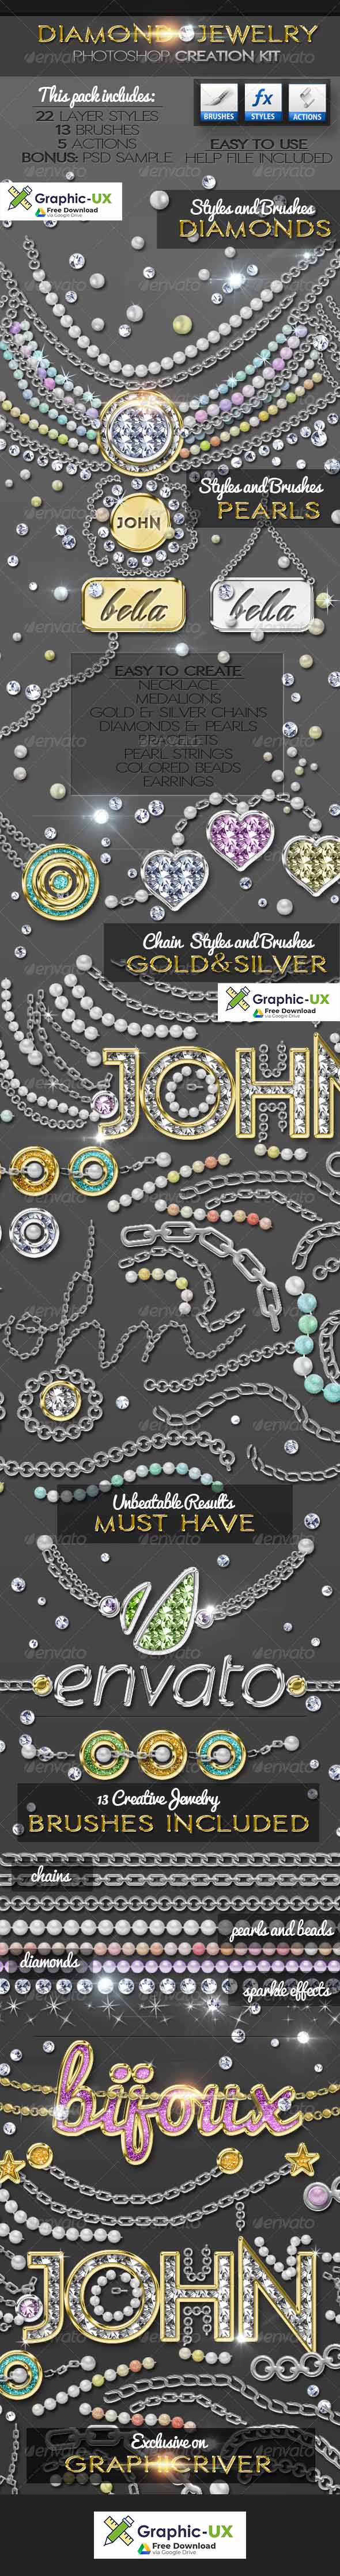 diamond gold silver and pearls photoshop action free download